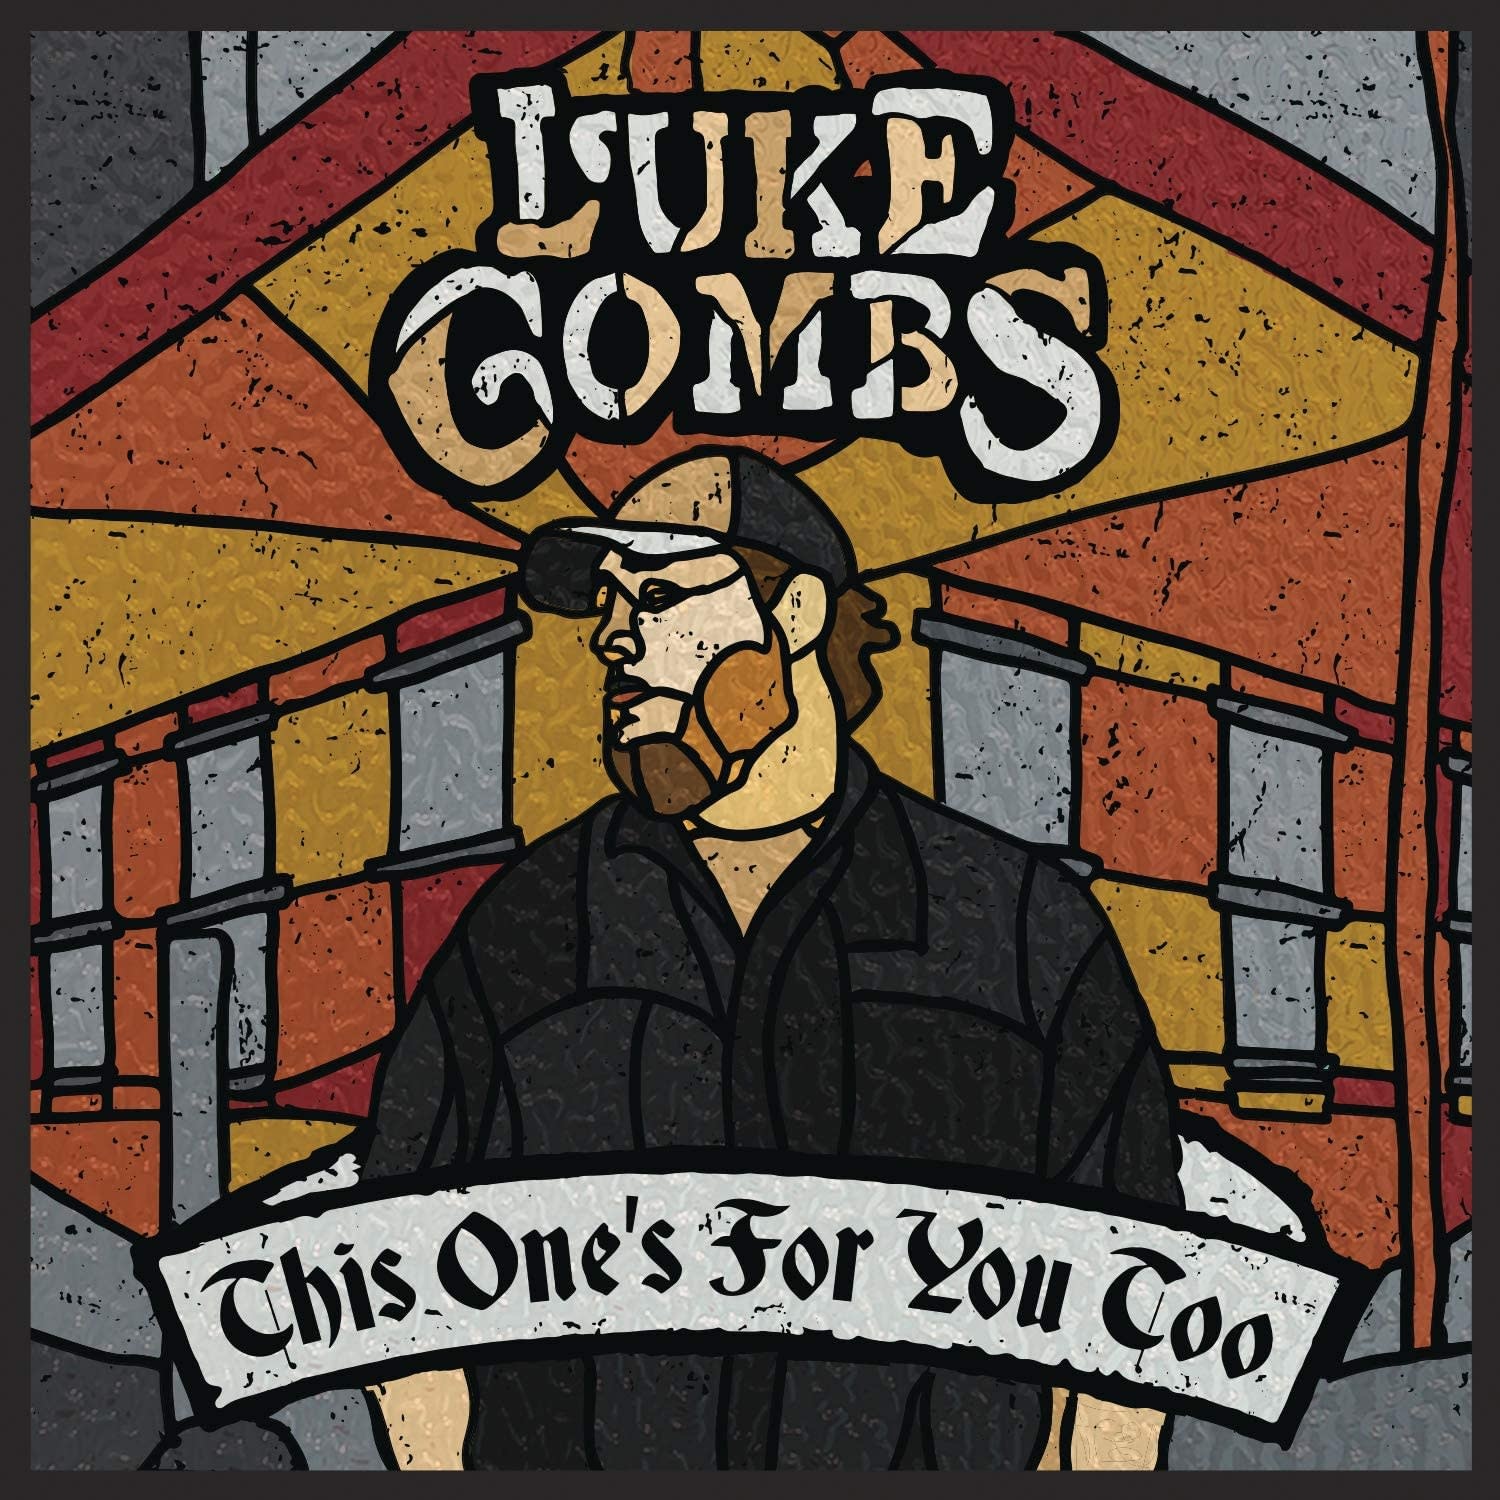 Luke Combs ‎– This One's For You Too